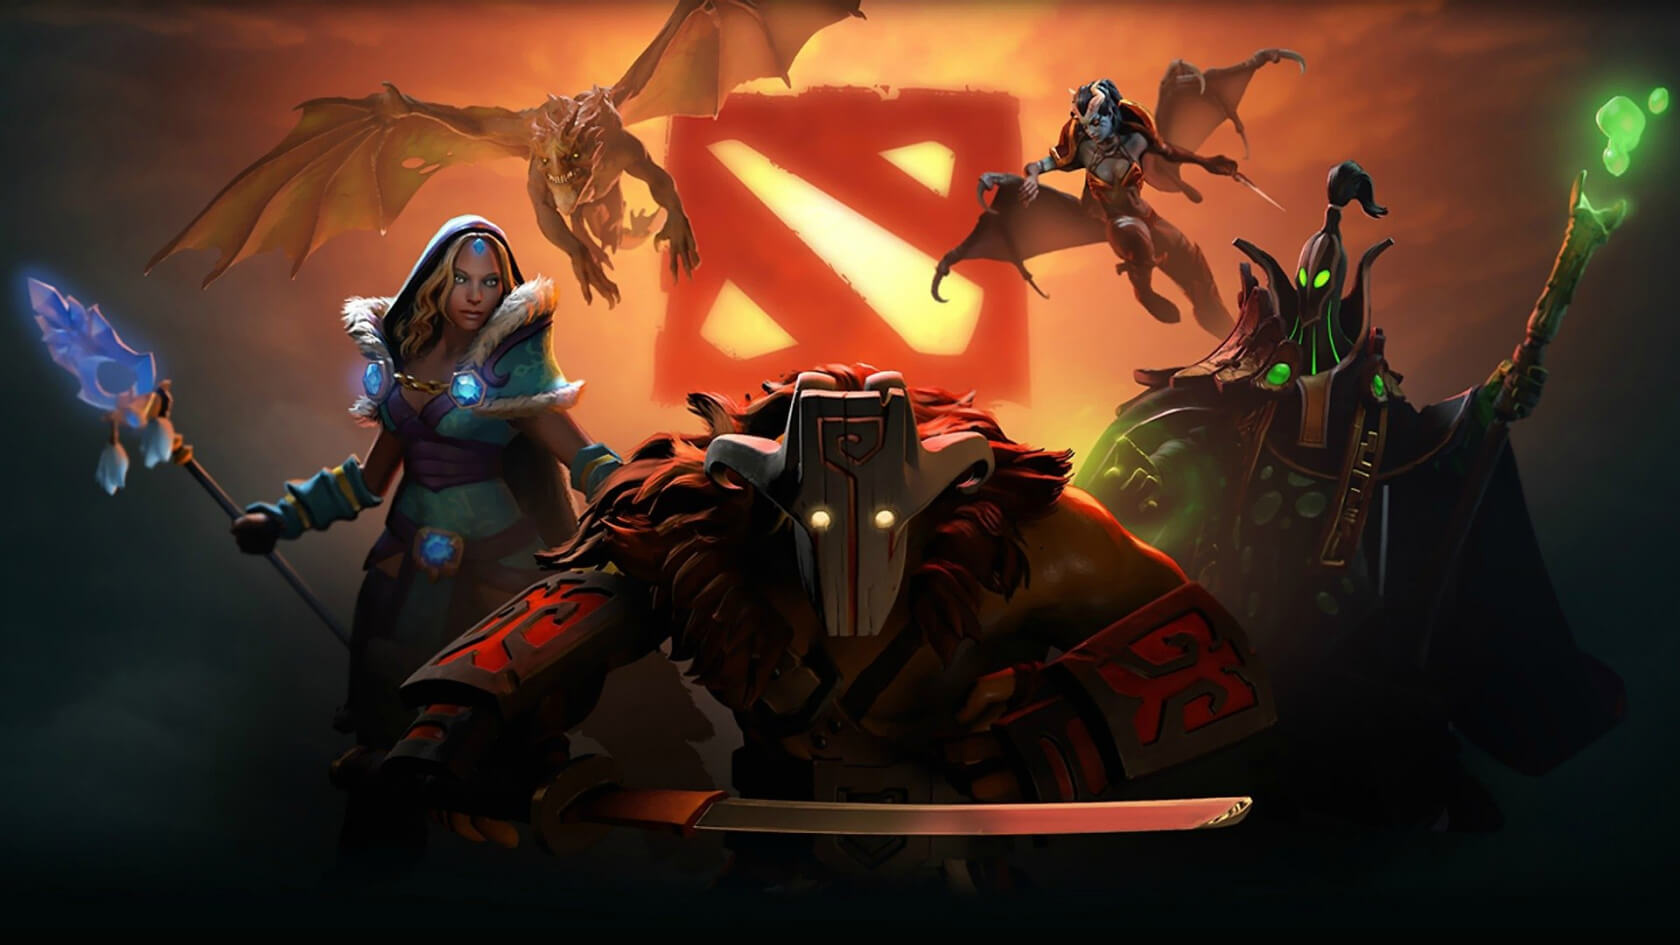 Valve is testing a new way to update Dota 2 regularly